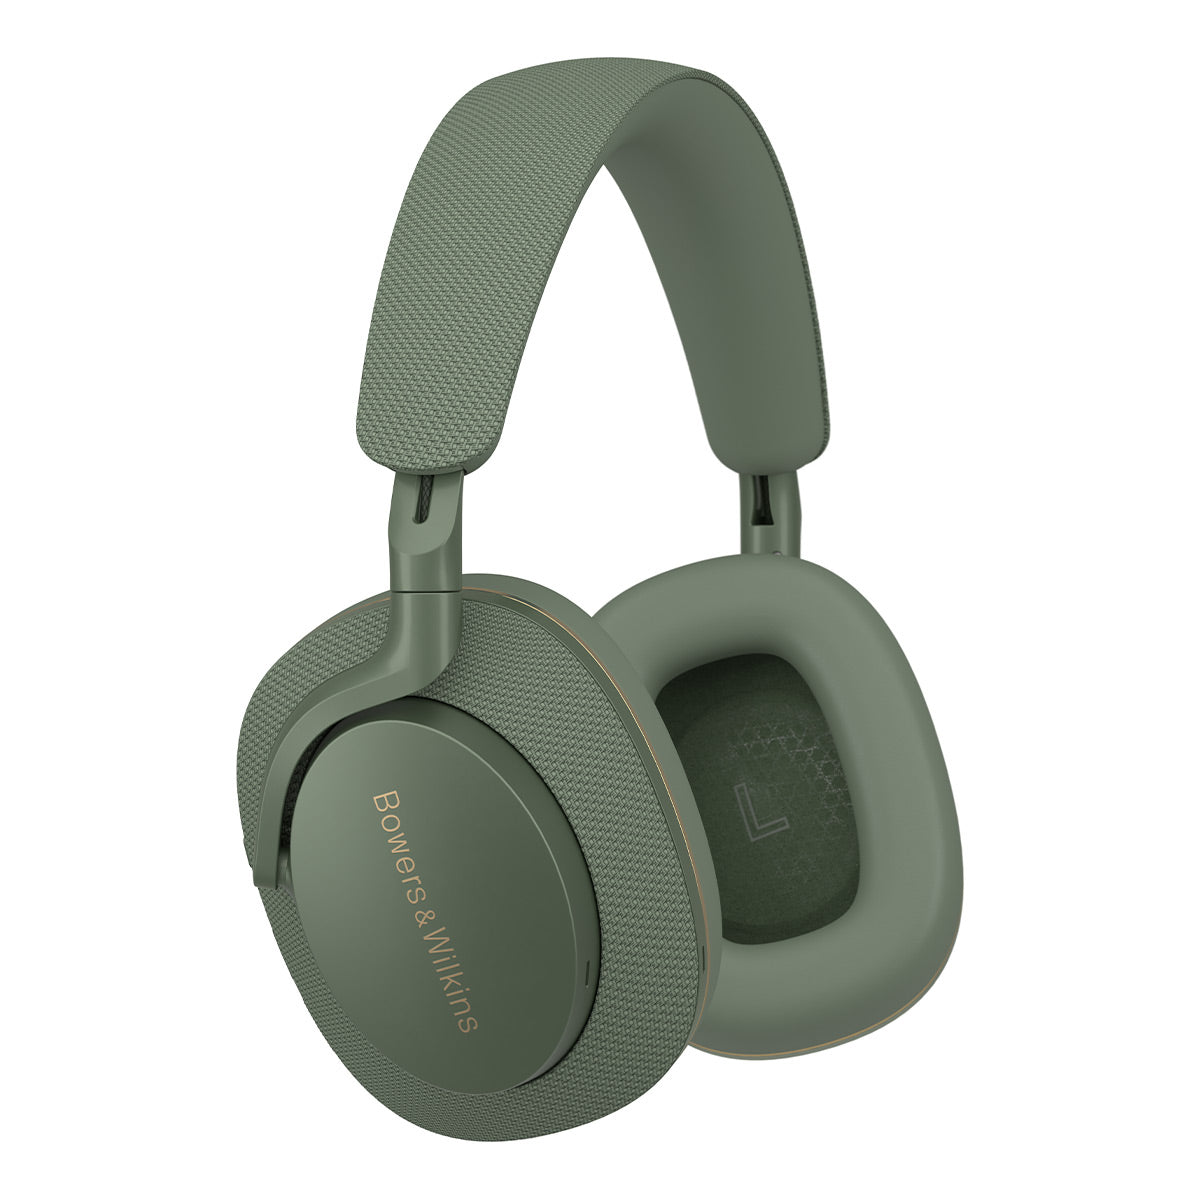  Bowers & Wilkins Px8 Over-Ear Wireless Headphones, Advanced  Active Noise Cancellation, Compatible with B&W Android/iOS Music App,  Premium Design, Offers 7-Hour Playback on 15-Min Quick Charge, Black :  Electronics